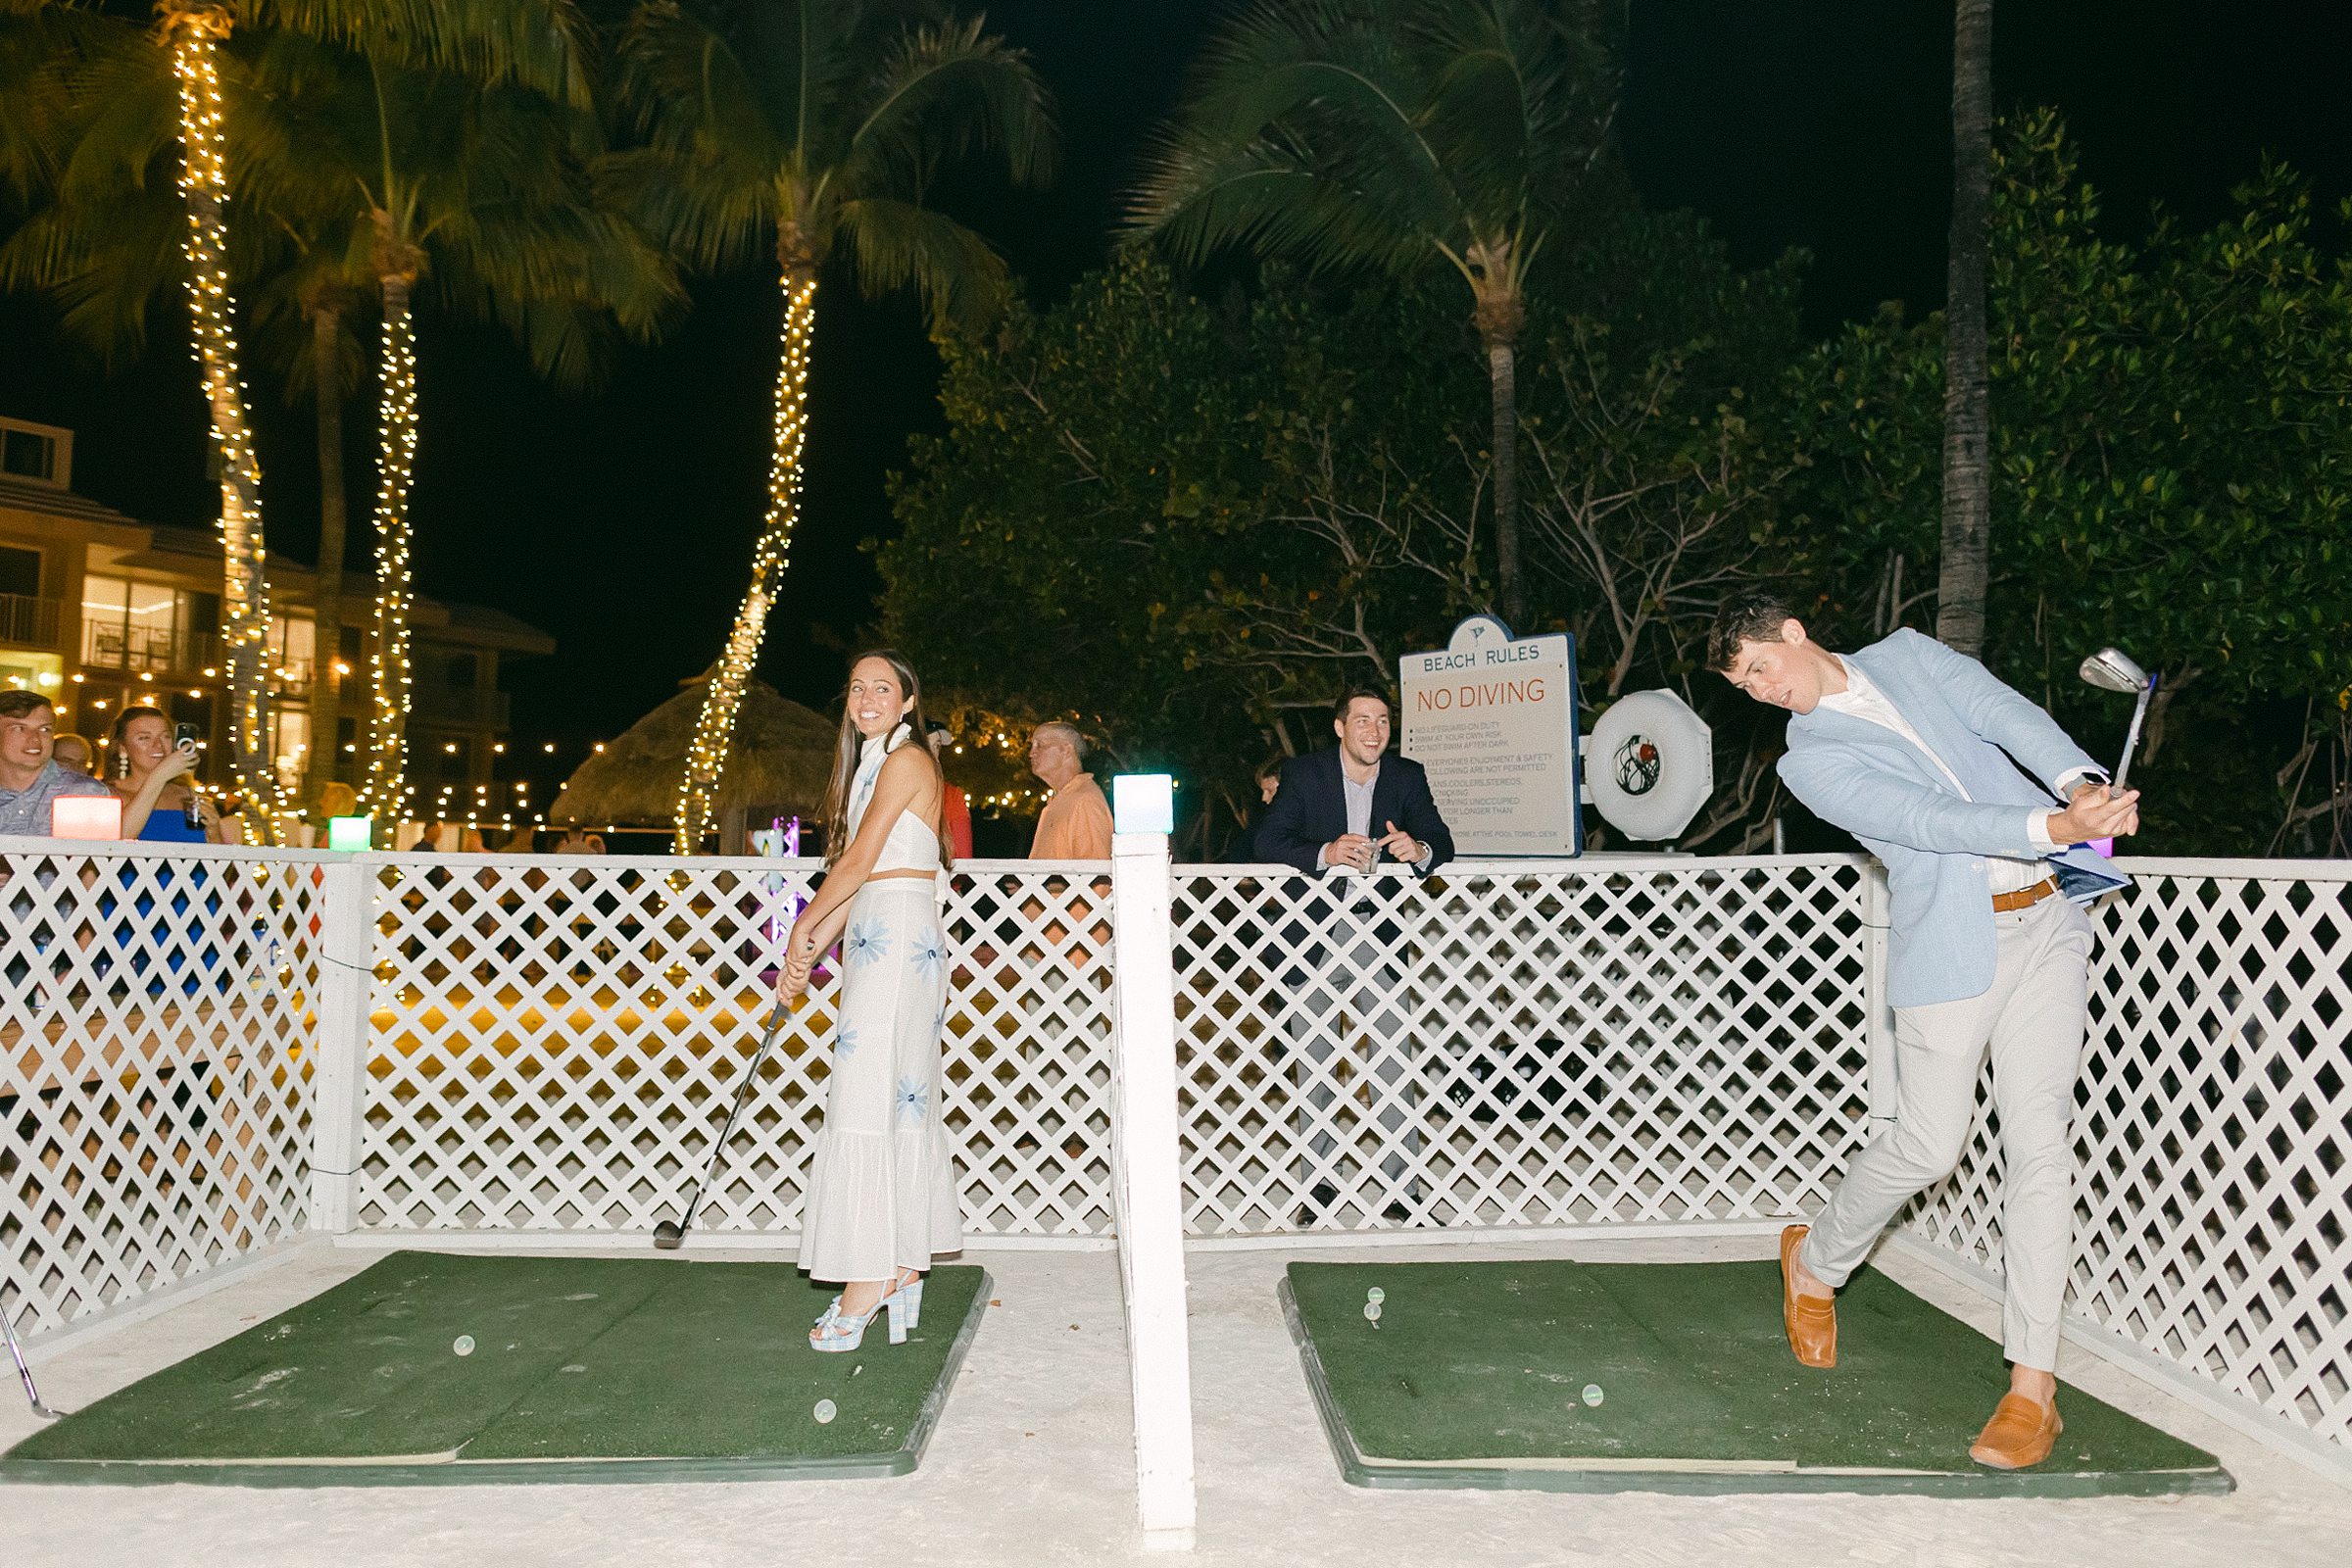 Bride and groom playing glow in the dark golf at their welcome party at ocean reef club